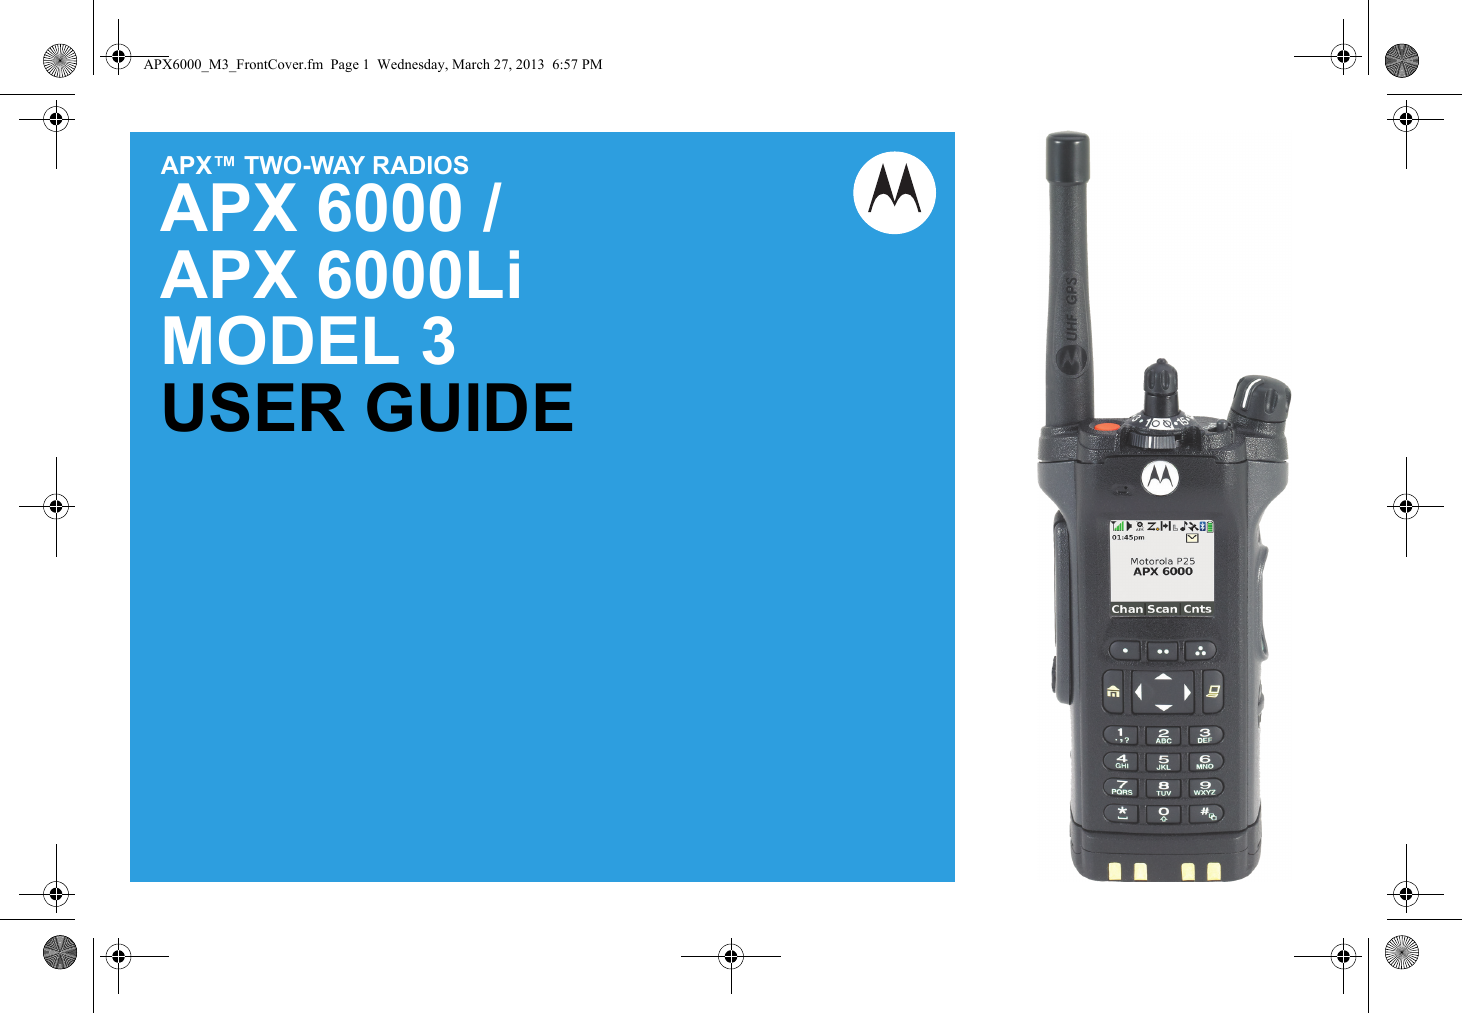 APX™ TWO-WAY RADIOSAPX 6000 / APX 6000LiMODEL 3USER GUIDEAPX6000_M3_FrontCover.fm  Page 1  Wednesday, March 27, 2013  6:57 PM